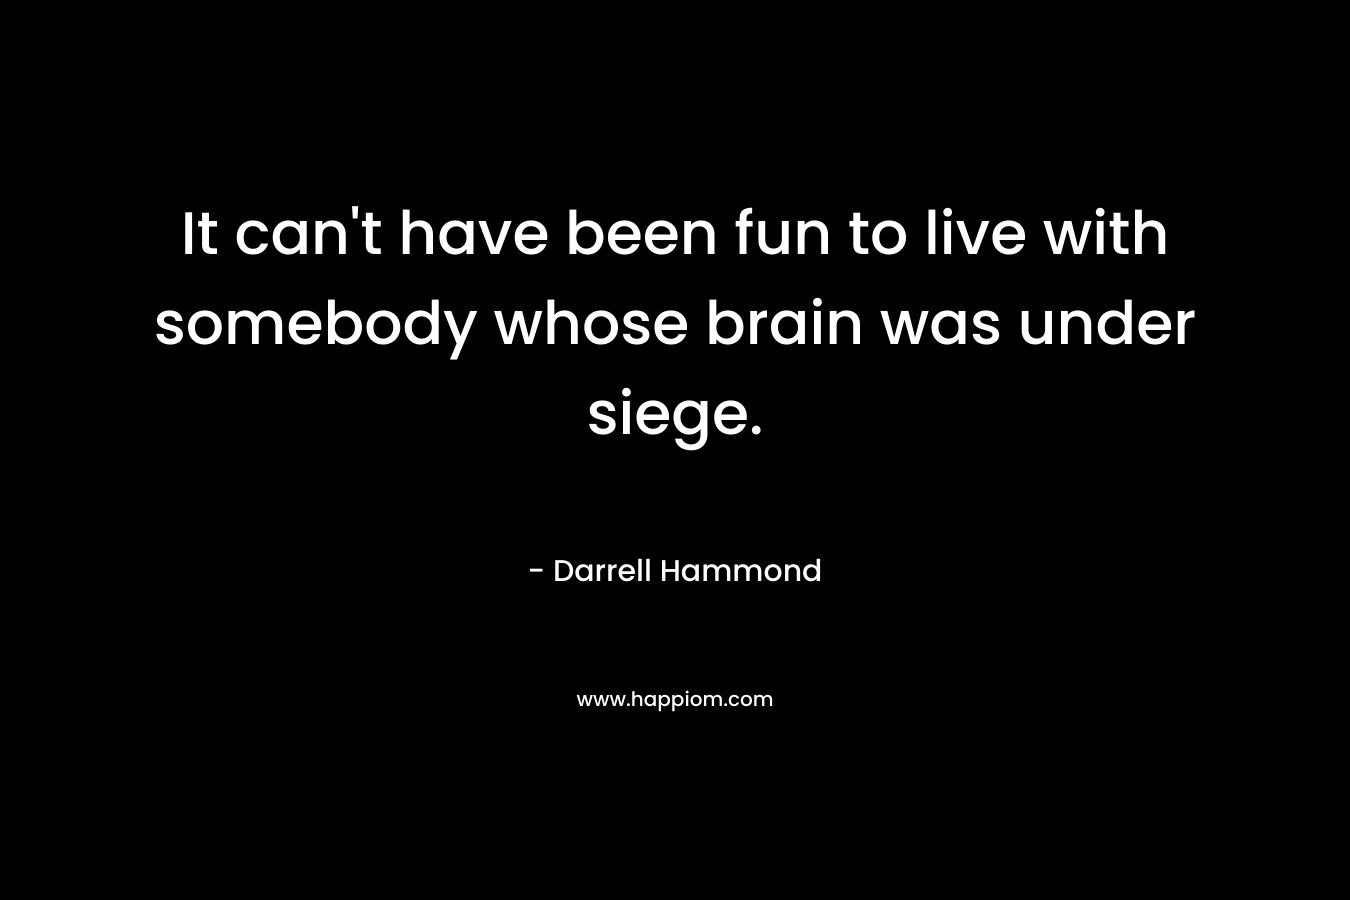 It can’t have been fun to live with somebody whose brain was under siege. – Darrell Hammond